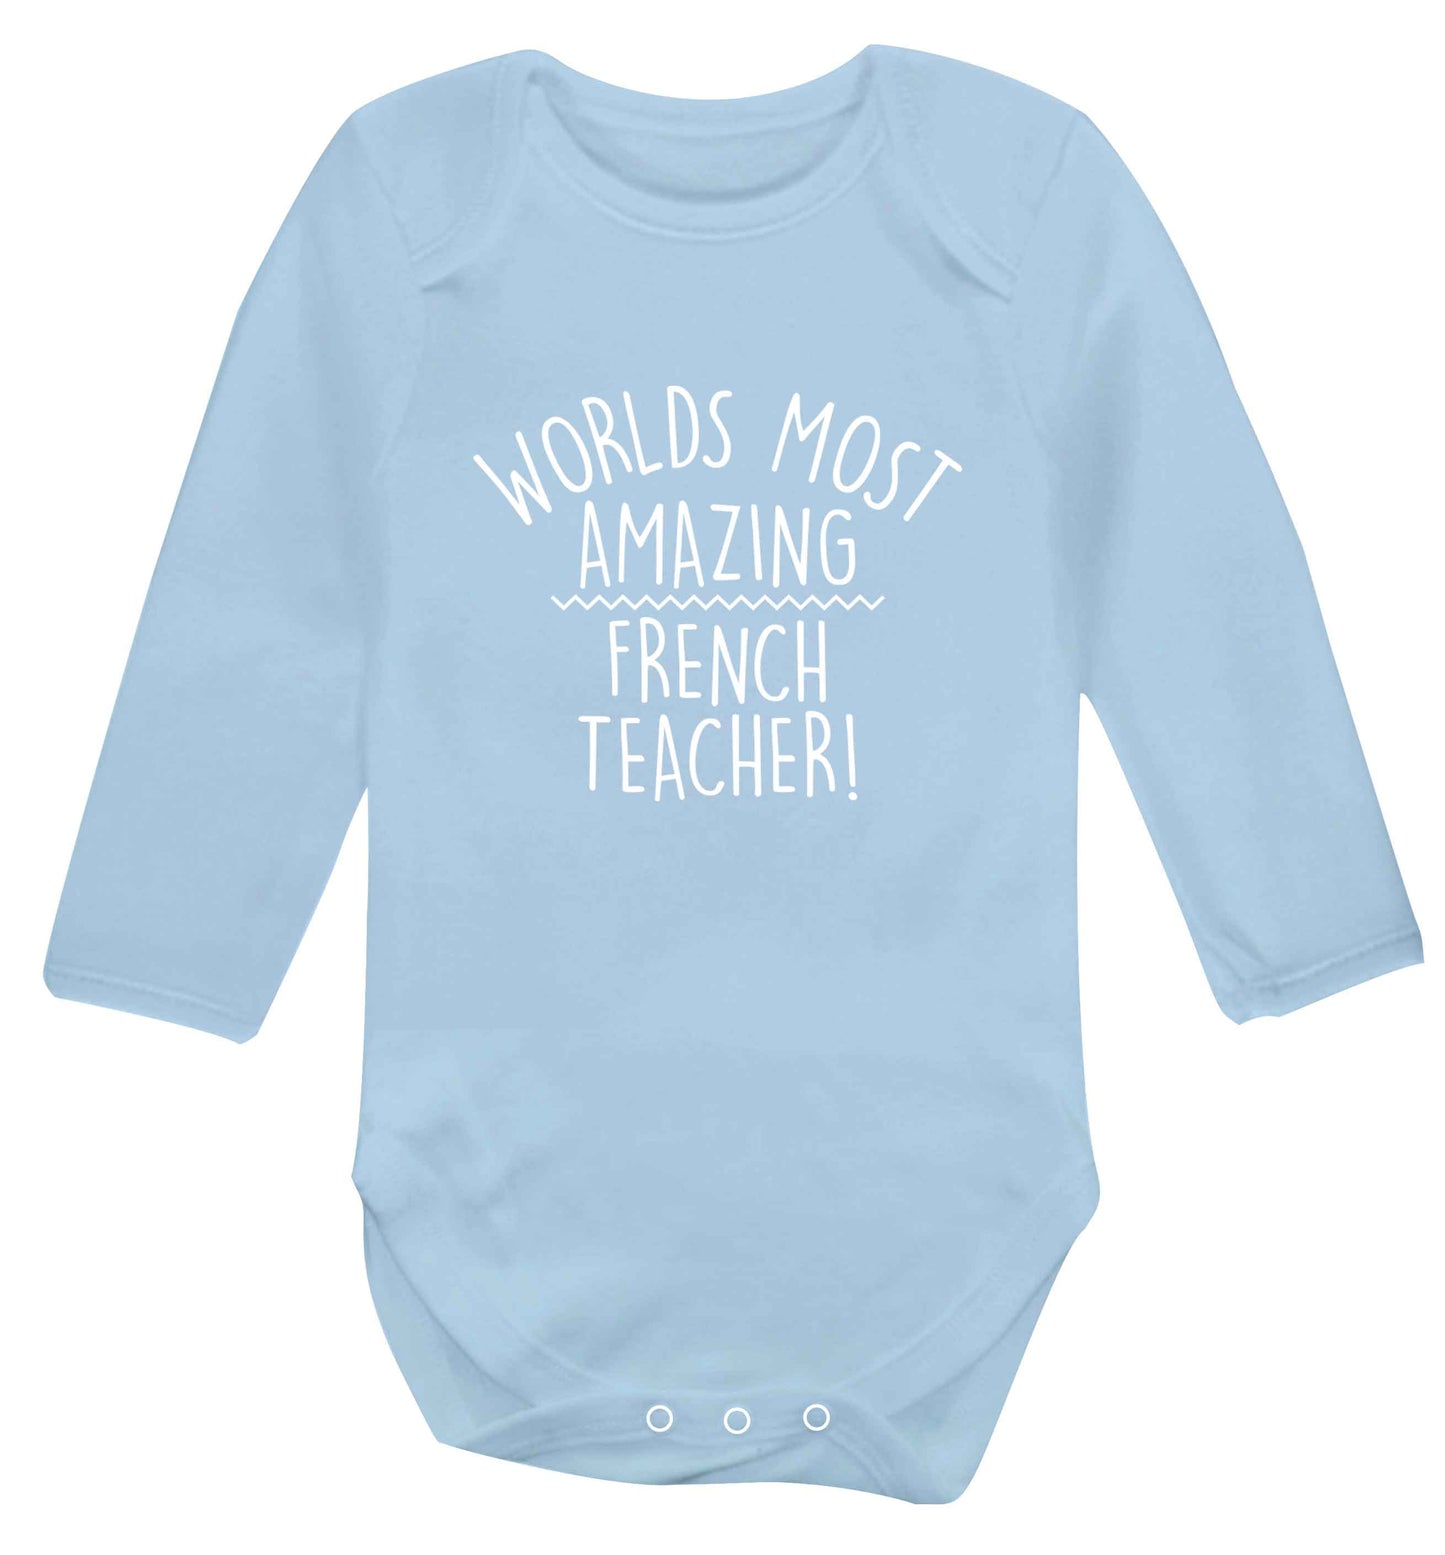 Worlds most amazing French teacher baby vest long sleeved pale blue 6-12 months